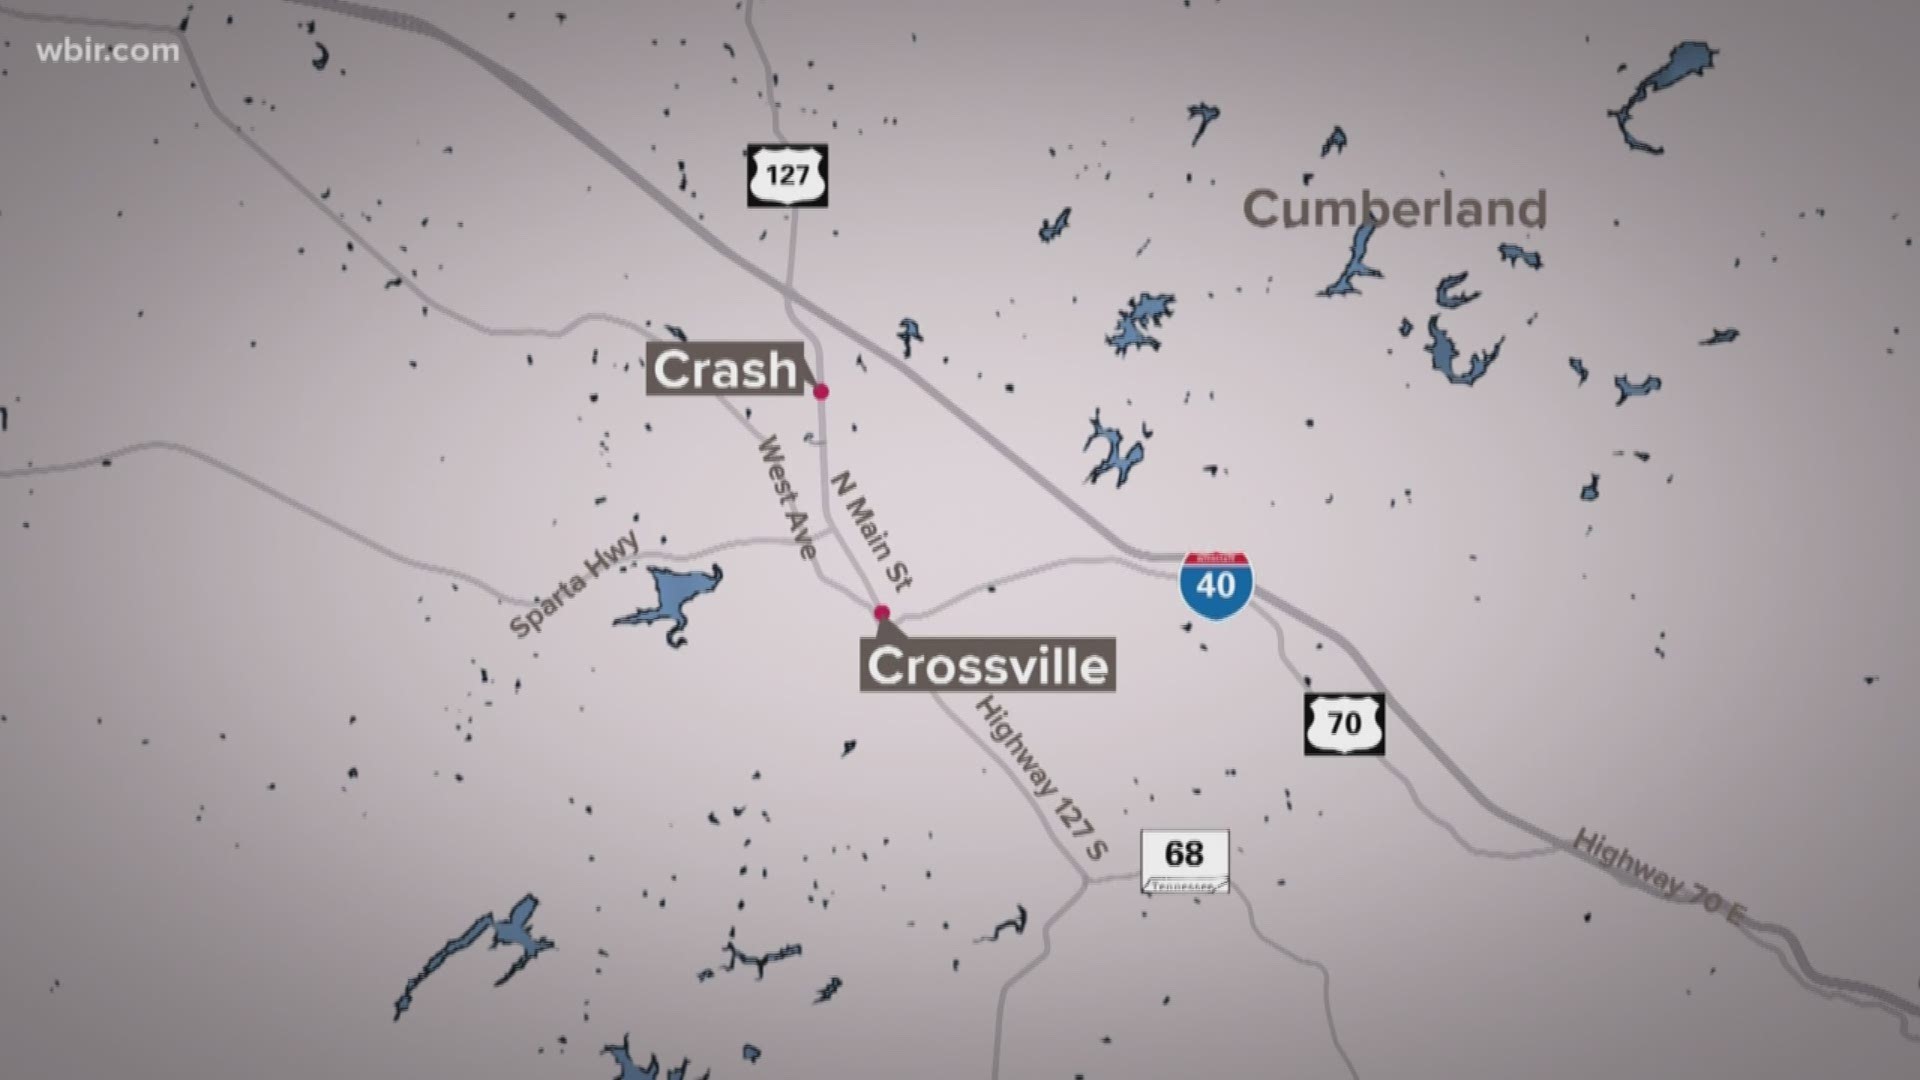 A Crossville man is severely hurt after a motorcycle crash. Crossville police say the 44-year-old was riding on US Highway 127 near Matherly Street yesterday afternoon when a car crossed over and hit him.